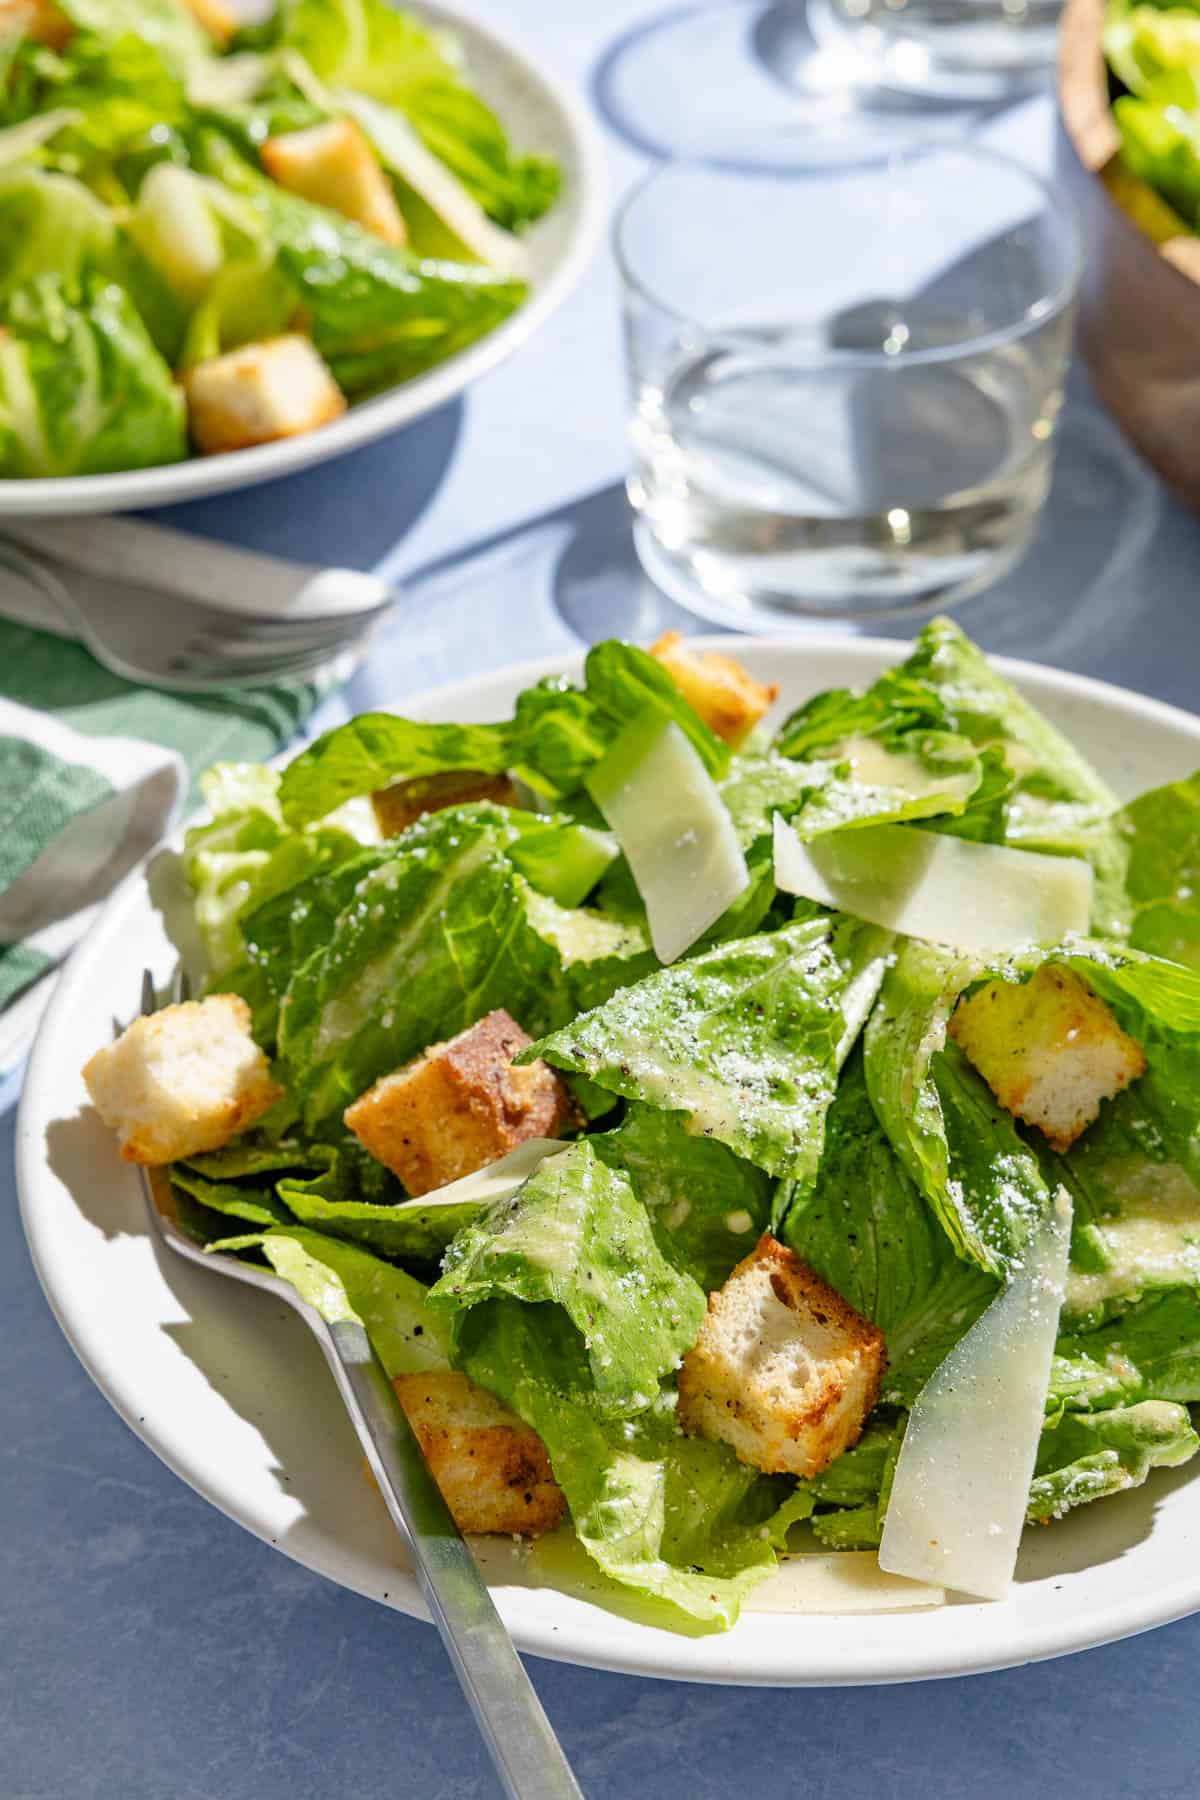 A close up of a plate of caesar salad with a fork. Next to this is another plate of the salad, a glass of water, and a fork on a cloth napkin.